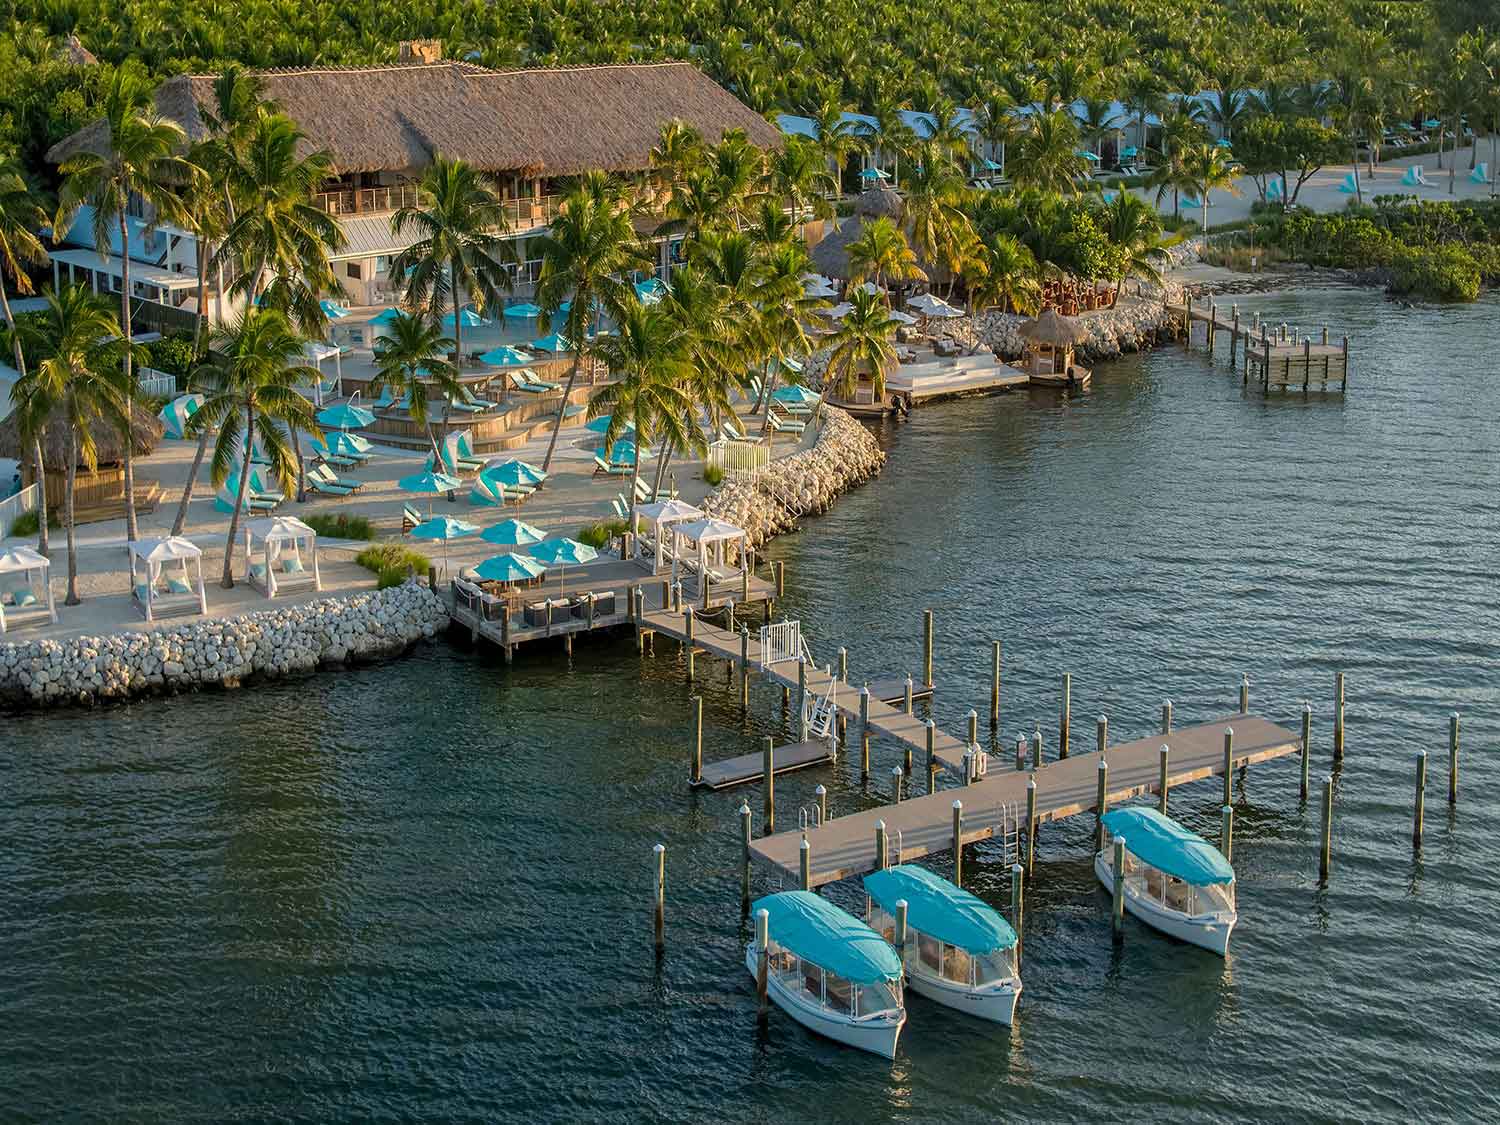 Overhead view of the Bungalows Key Largo